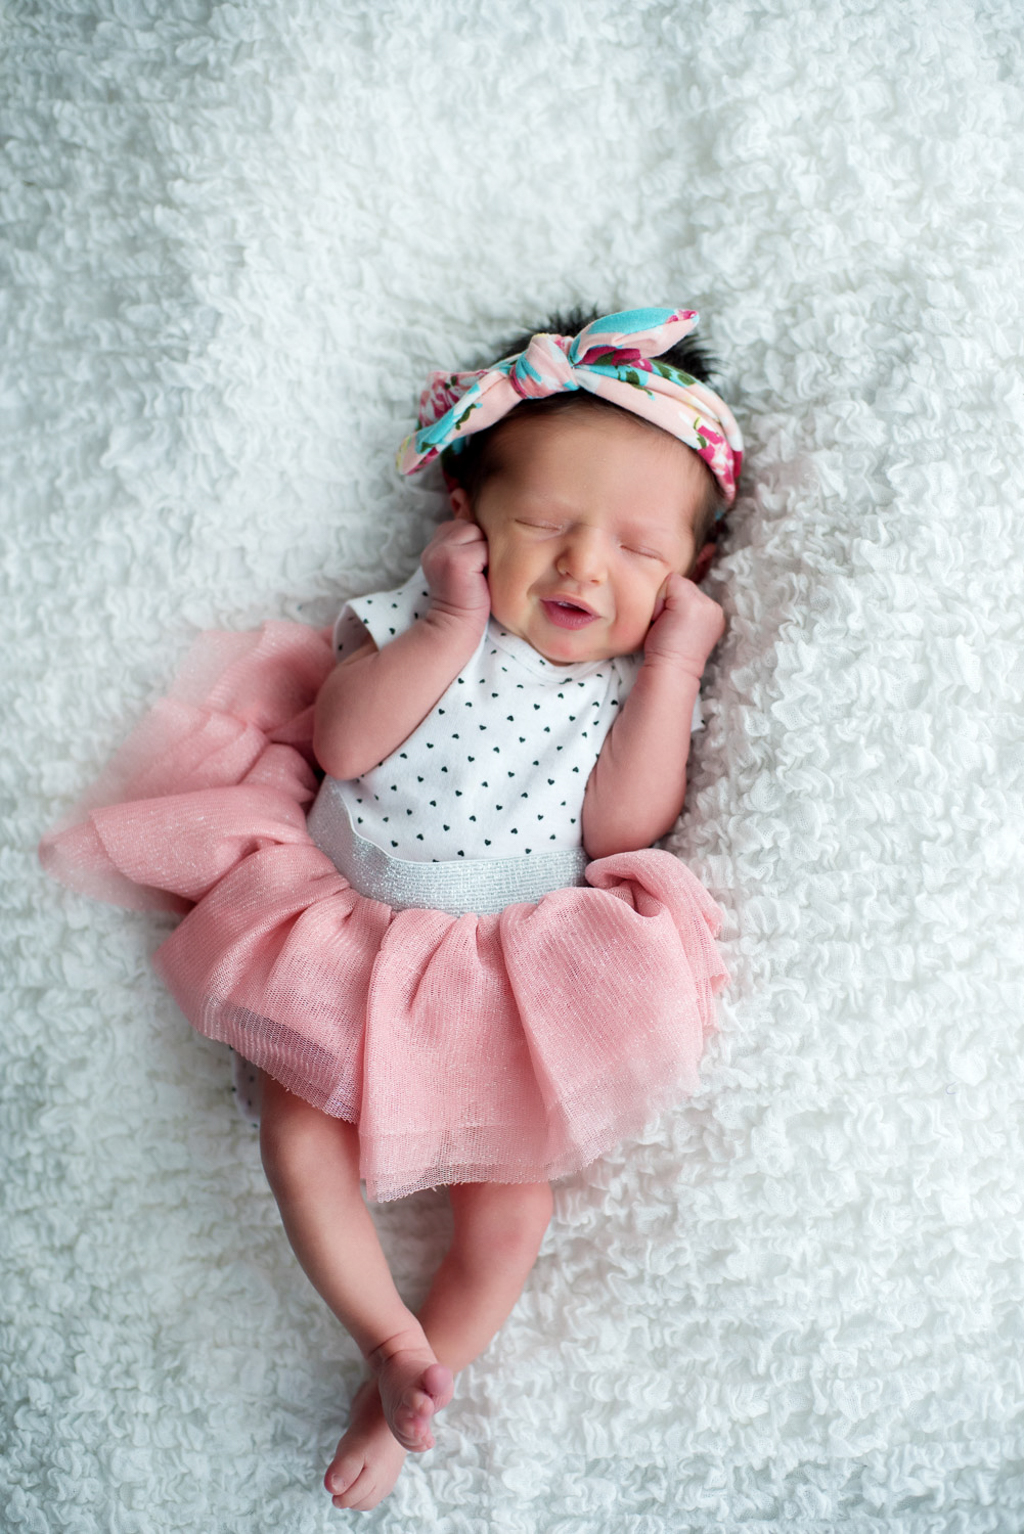 A newborn girl in a pink tutu and polkadot top smiles with her hands on her cheeks